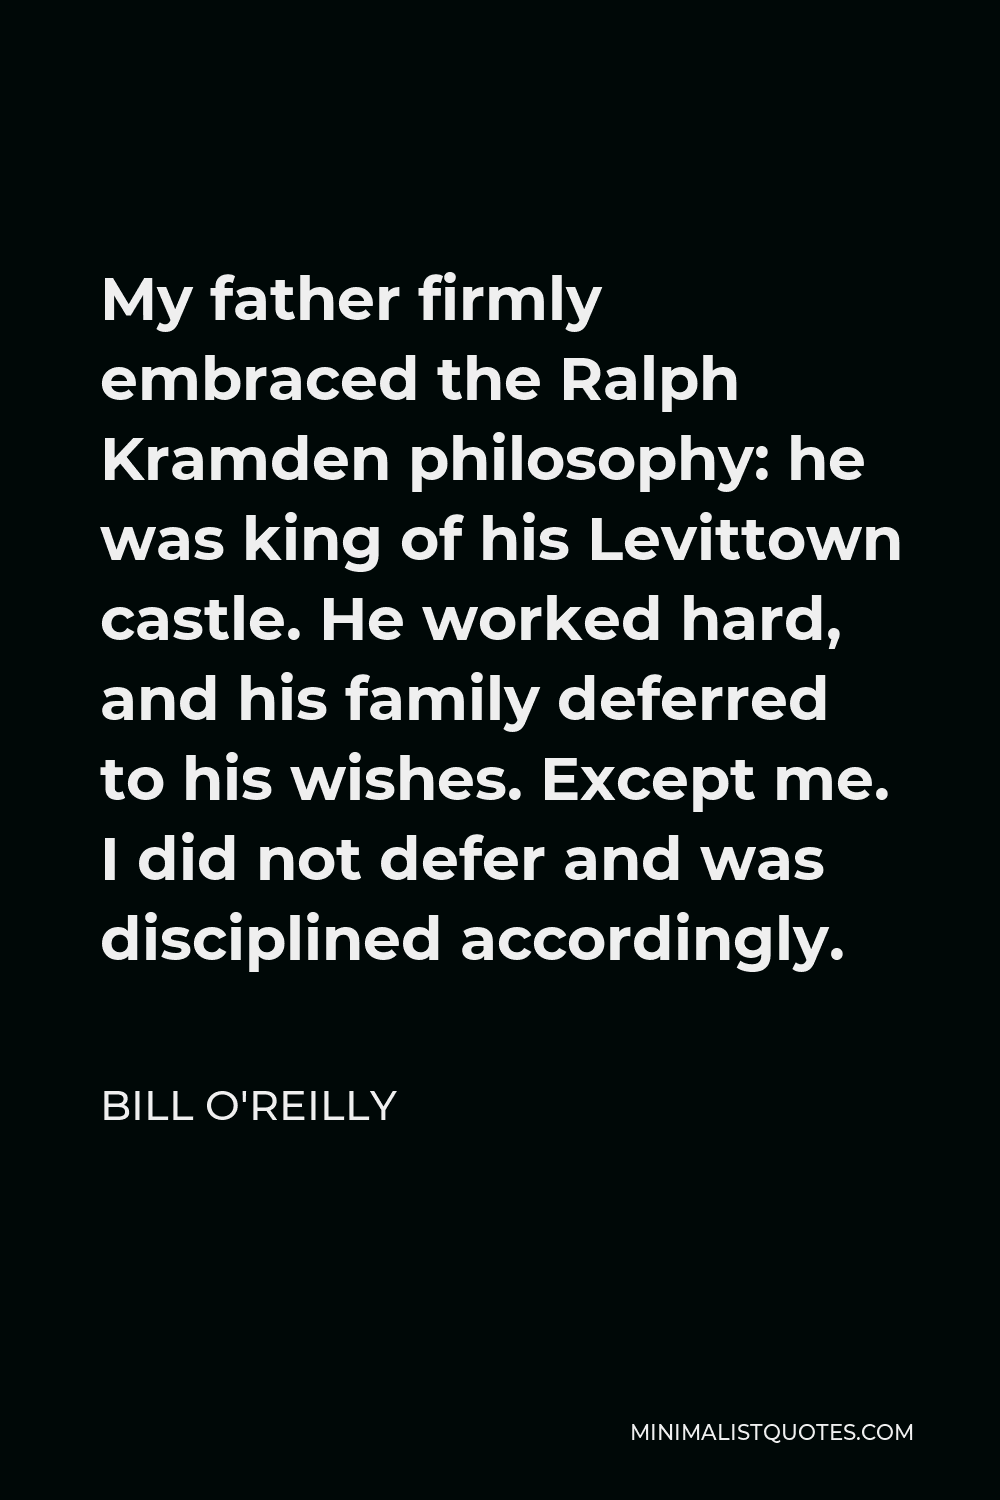 Bill O'Reilly Quote - My father firmly embraced the Ralph Kramden philosophy: he was king of his Levittown castle. He worked hard, and his family deferred to his wishes. Except me. I did not defer and was disciplined accordingly.